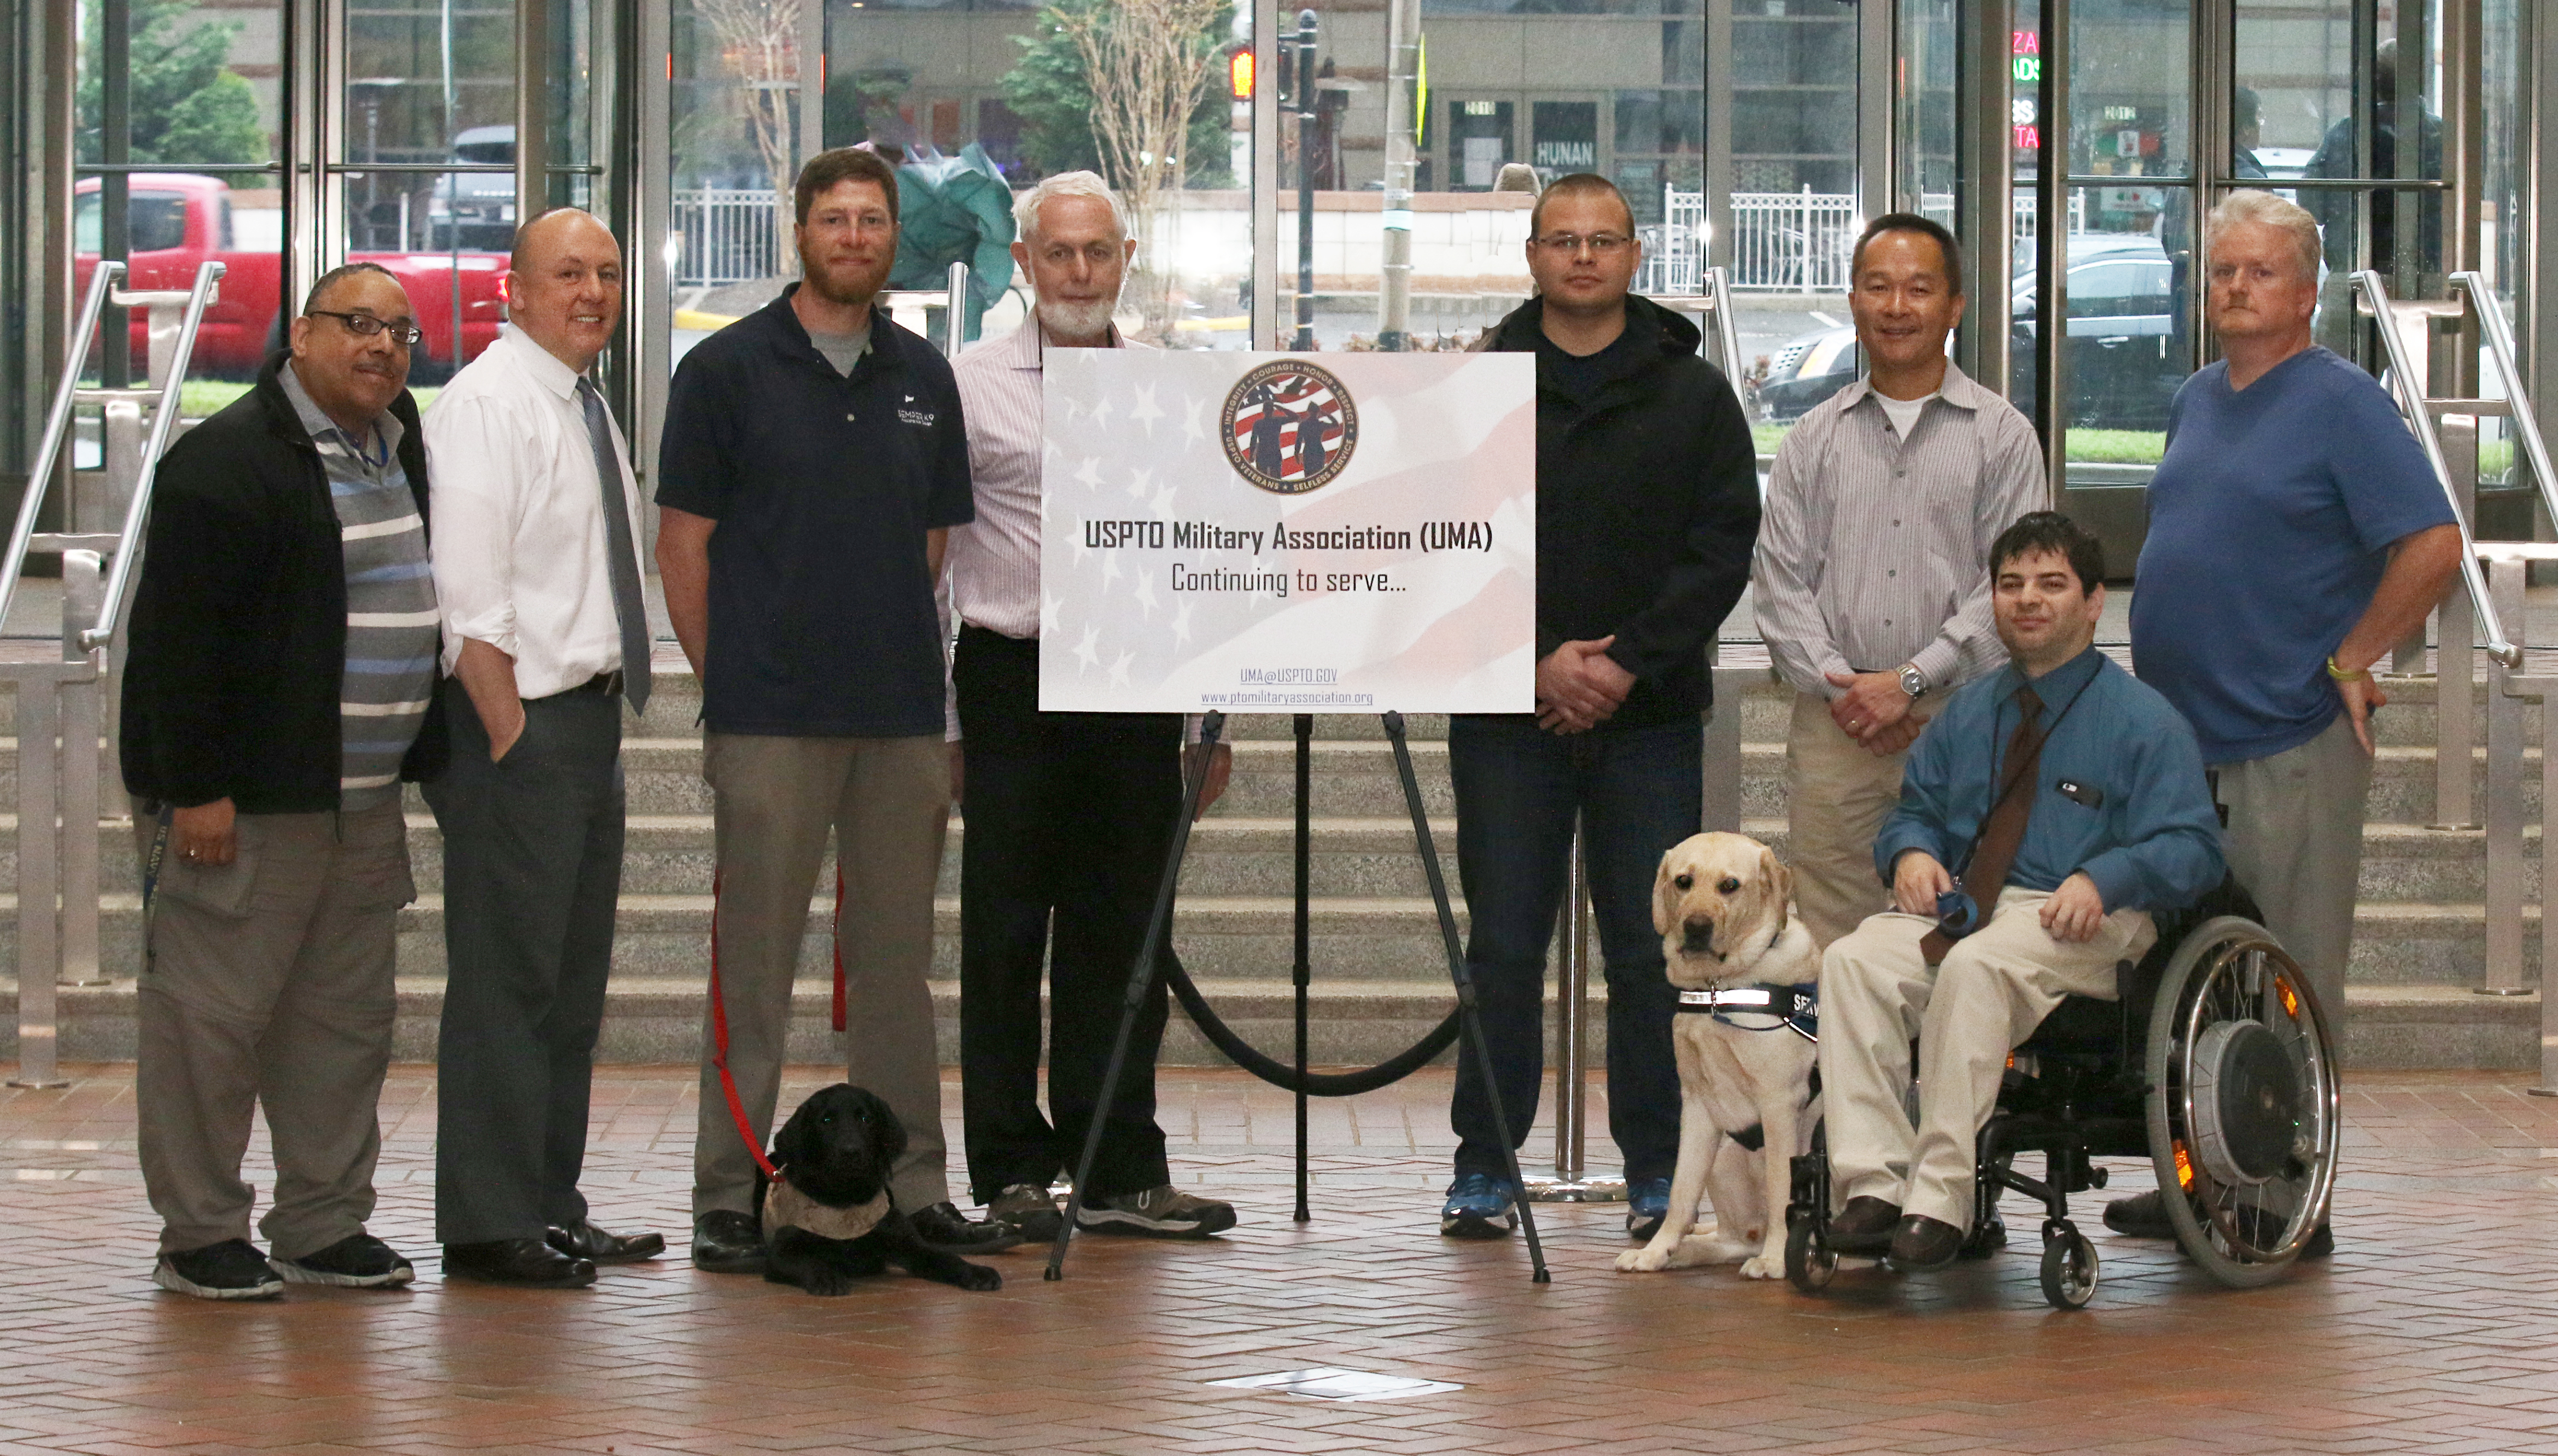 Semper K9 Assistance Dogs Visits the UMA and ResponsAbility